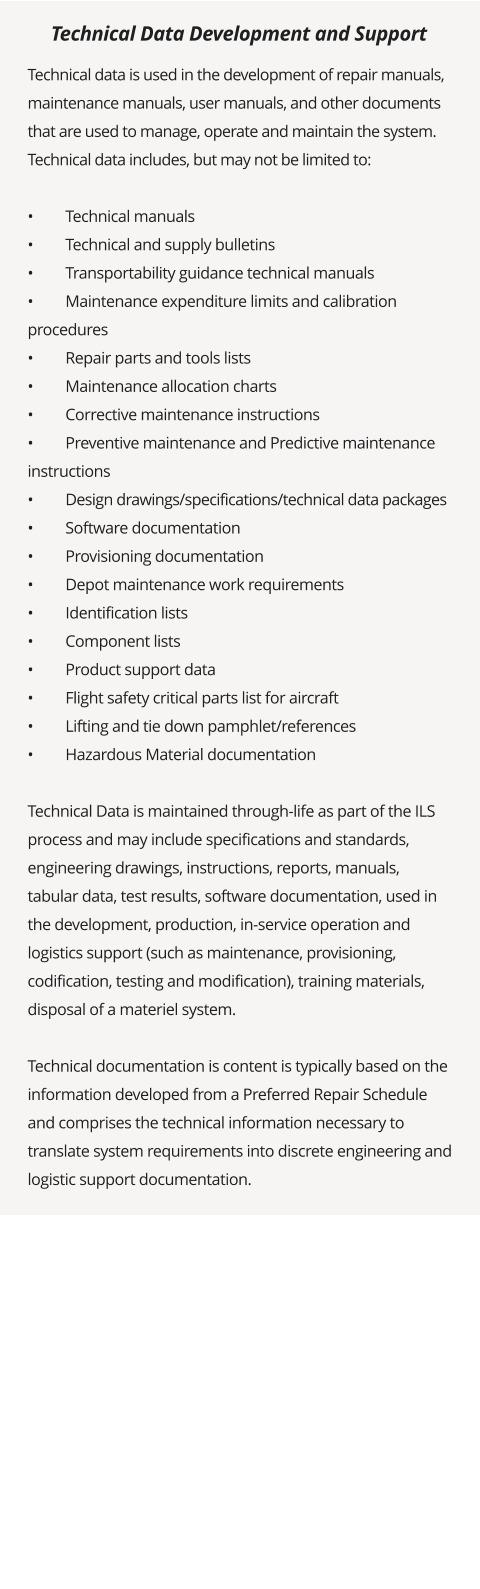 Technical data is used in the development of repair manuals, maintenance manuals, user manuals, and other documents that are used to manage, operate and maintain the system. Technical data includes, but may not be limited to:  •	Technical manuals •	Technical and supply bulletins •	Transportability guidance technical manuals •	Maintenance expenditure limits and calibration procedures •	Repair parts and tools lists •	Maintenance allocation charts •	Corrective maintenance instructions •	Preventive maintenance and Predictive maintenance instructions •	Design drawings/specifications/technical data packages •	Software documentation •	Provisioning documentation •	Depot maintenance work requirements •	Identification lists •	Component lists •	Product support data •	Flight safety critical parts list for aircraft •	Lifting and tie down pamphlet/references •	Hazardous Material documentation  Technical Data is maintained through-life as part of the ILS process and may include specifications and standards, engineering drawings, instructions, reports, manuals, tabular data, test results, software documentation, used in the development, production, in-service operation and logistics support (such as maintenance, provisioning, codification, testing and modification), training materials, disposal of a materiel system.  Technical documentation is content is typically based on the information developed from a Preferred Repair Schedule and comprises the technical information necessary to translate system requirements into discrete engineering and logistic support documentation.   Technical Data Development and Support